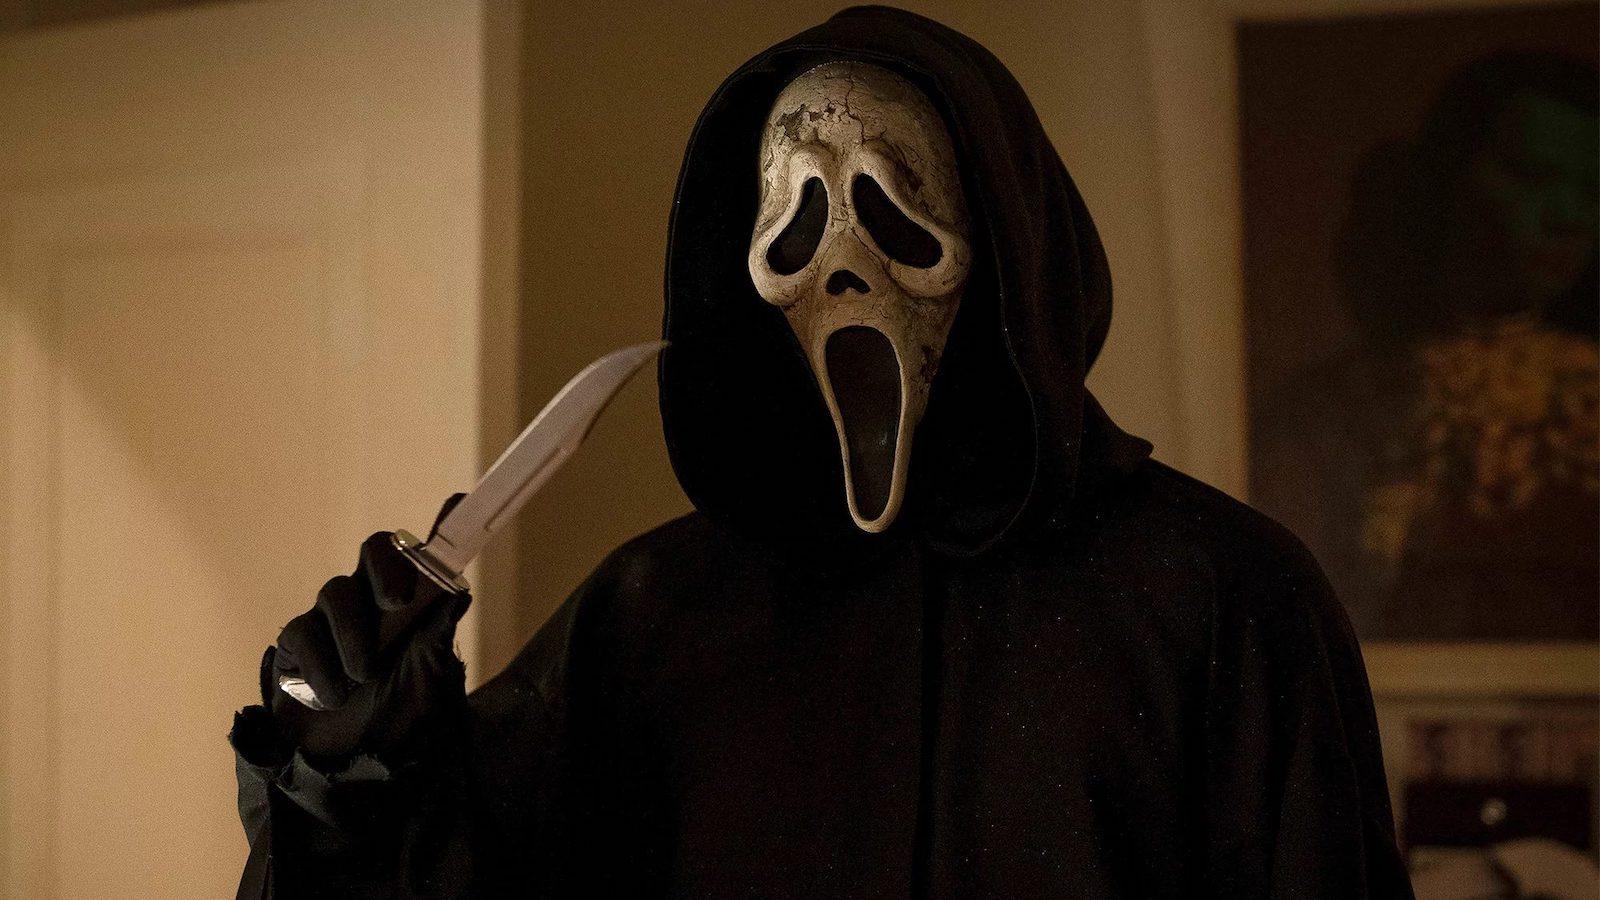 Scream 6 Adds More Cast Members, Will Reportedly Take Place In New